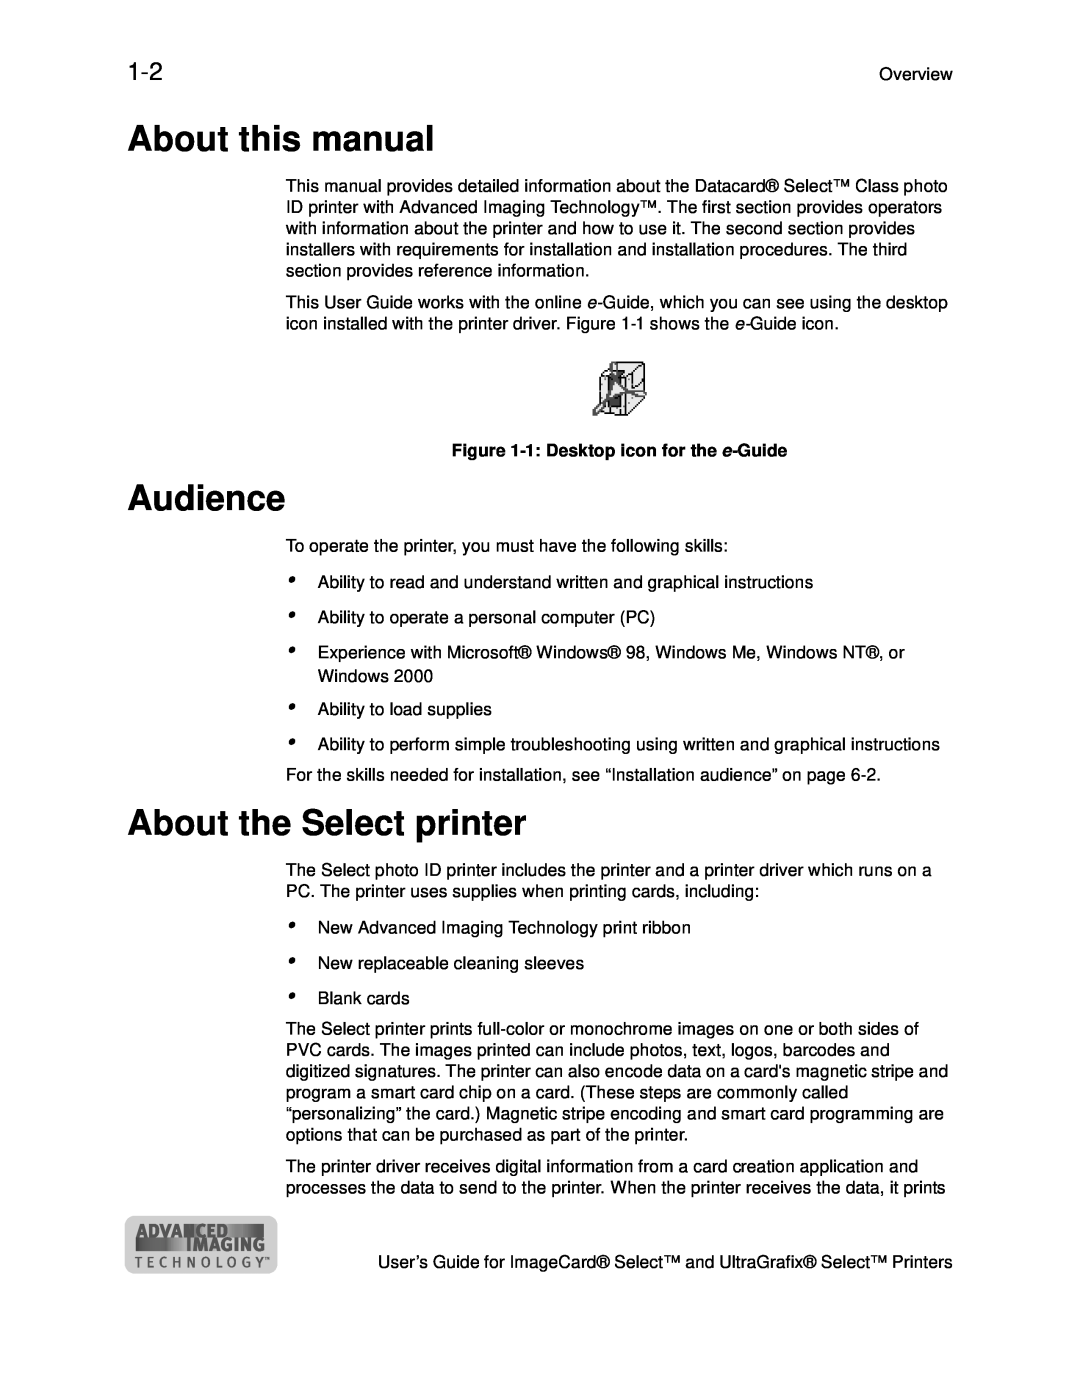 Datacard Group ImageCard SelectTM and UltraGrafix SelectTM Printers About this manual, Audience, About the Select printer 